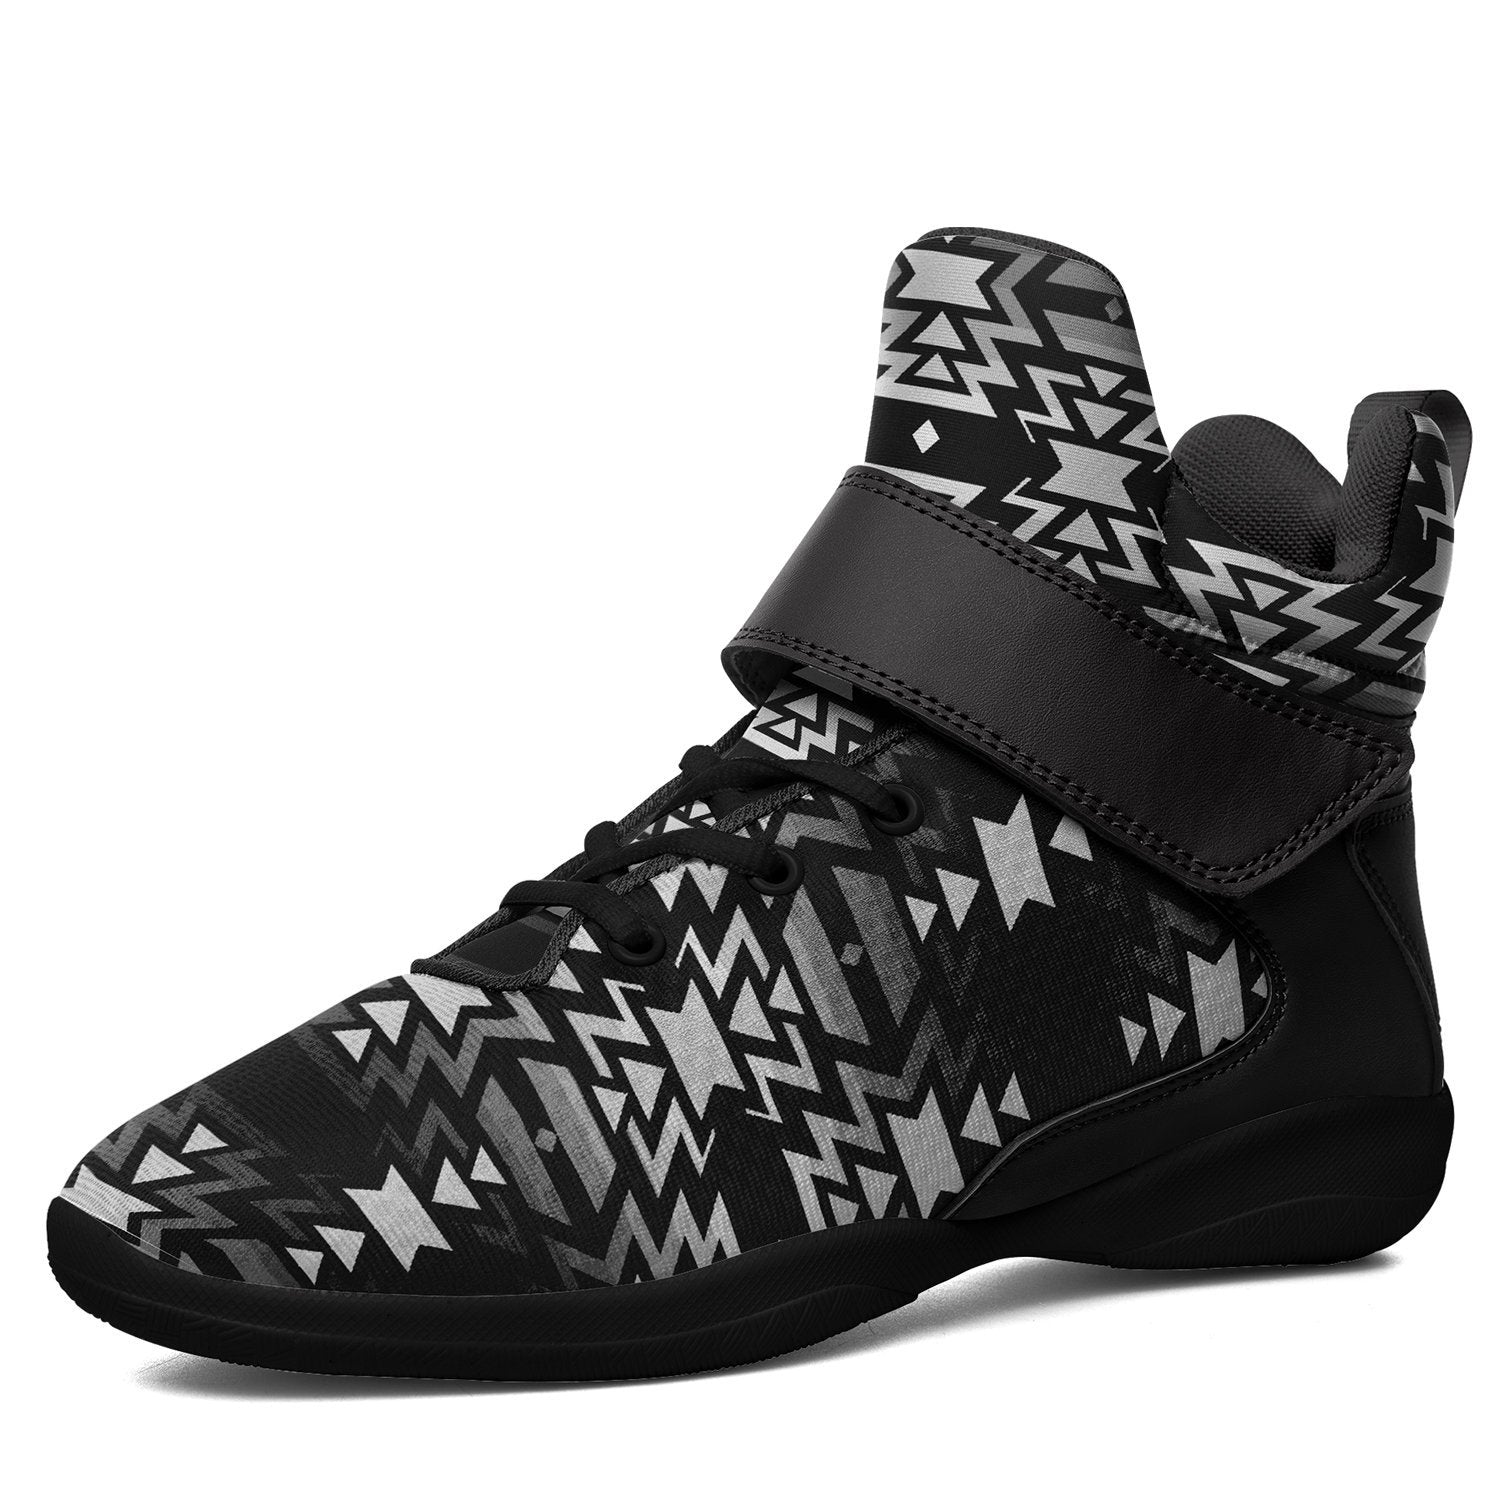 Black Fire Black and White Ipottaa Basketball / Sport High Top Shoes - Black Sole 49 Dzine US Women 8.5 / EUR 40 Black Sole with Black Strap 